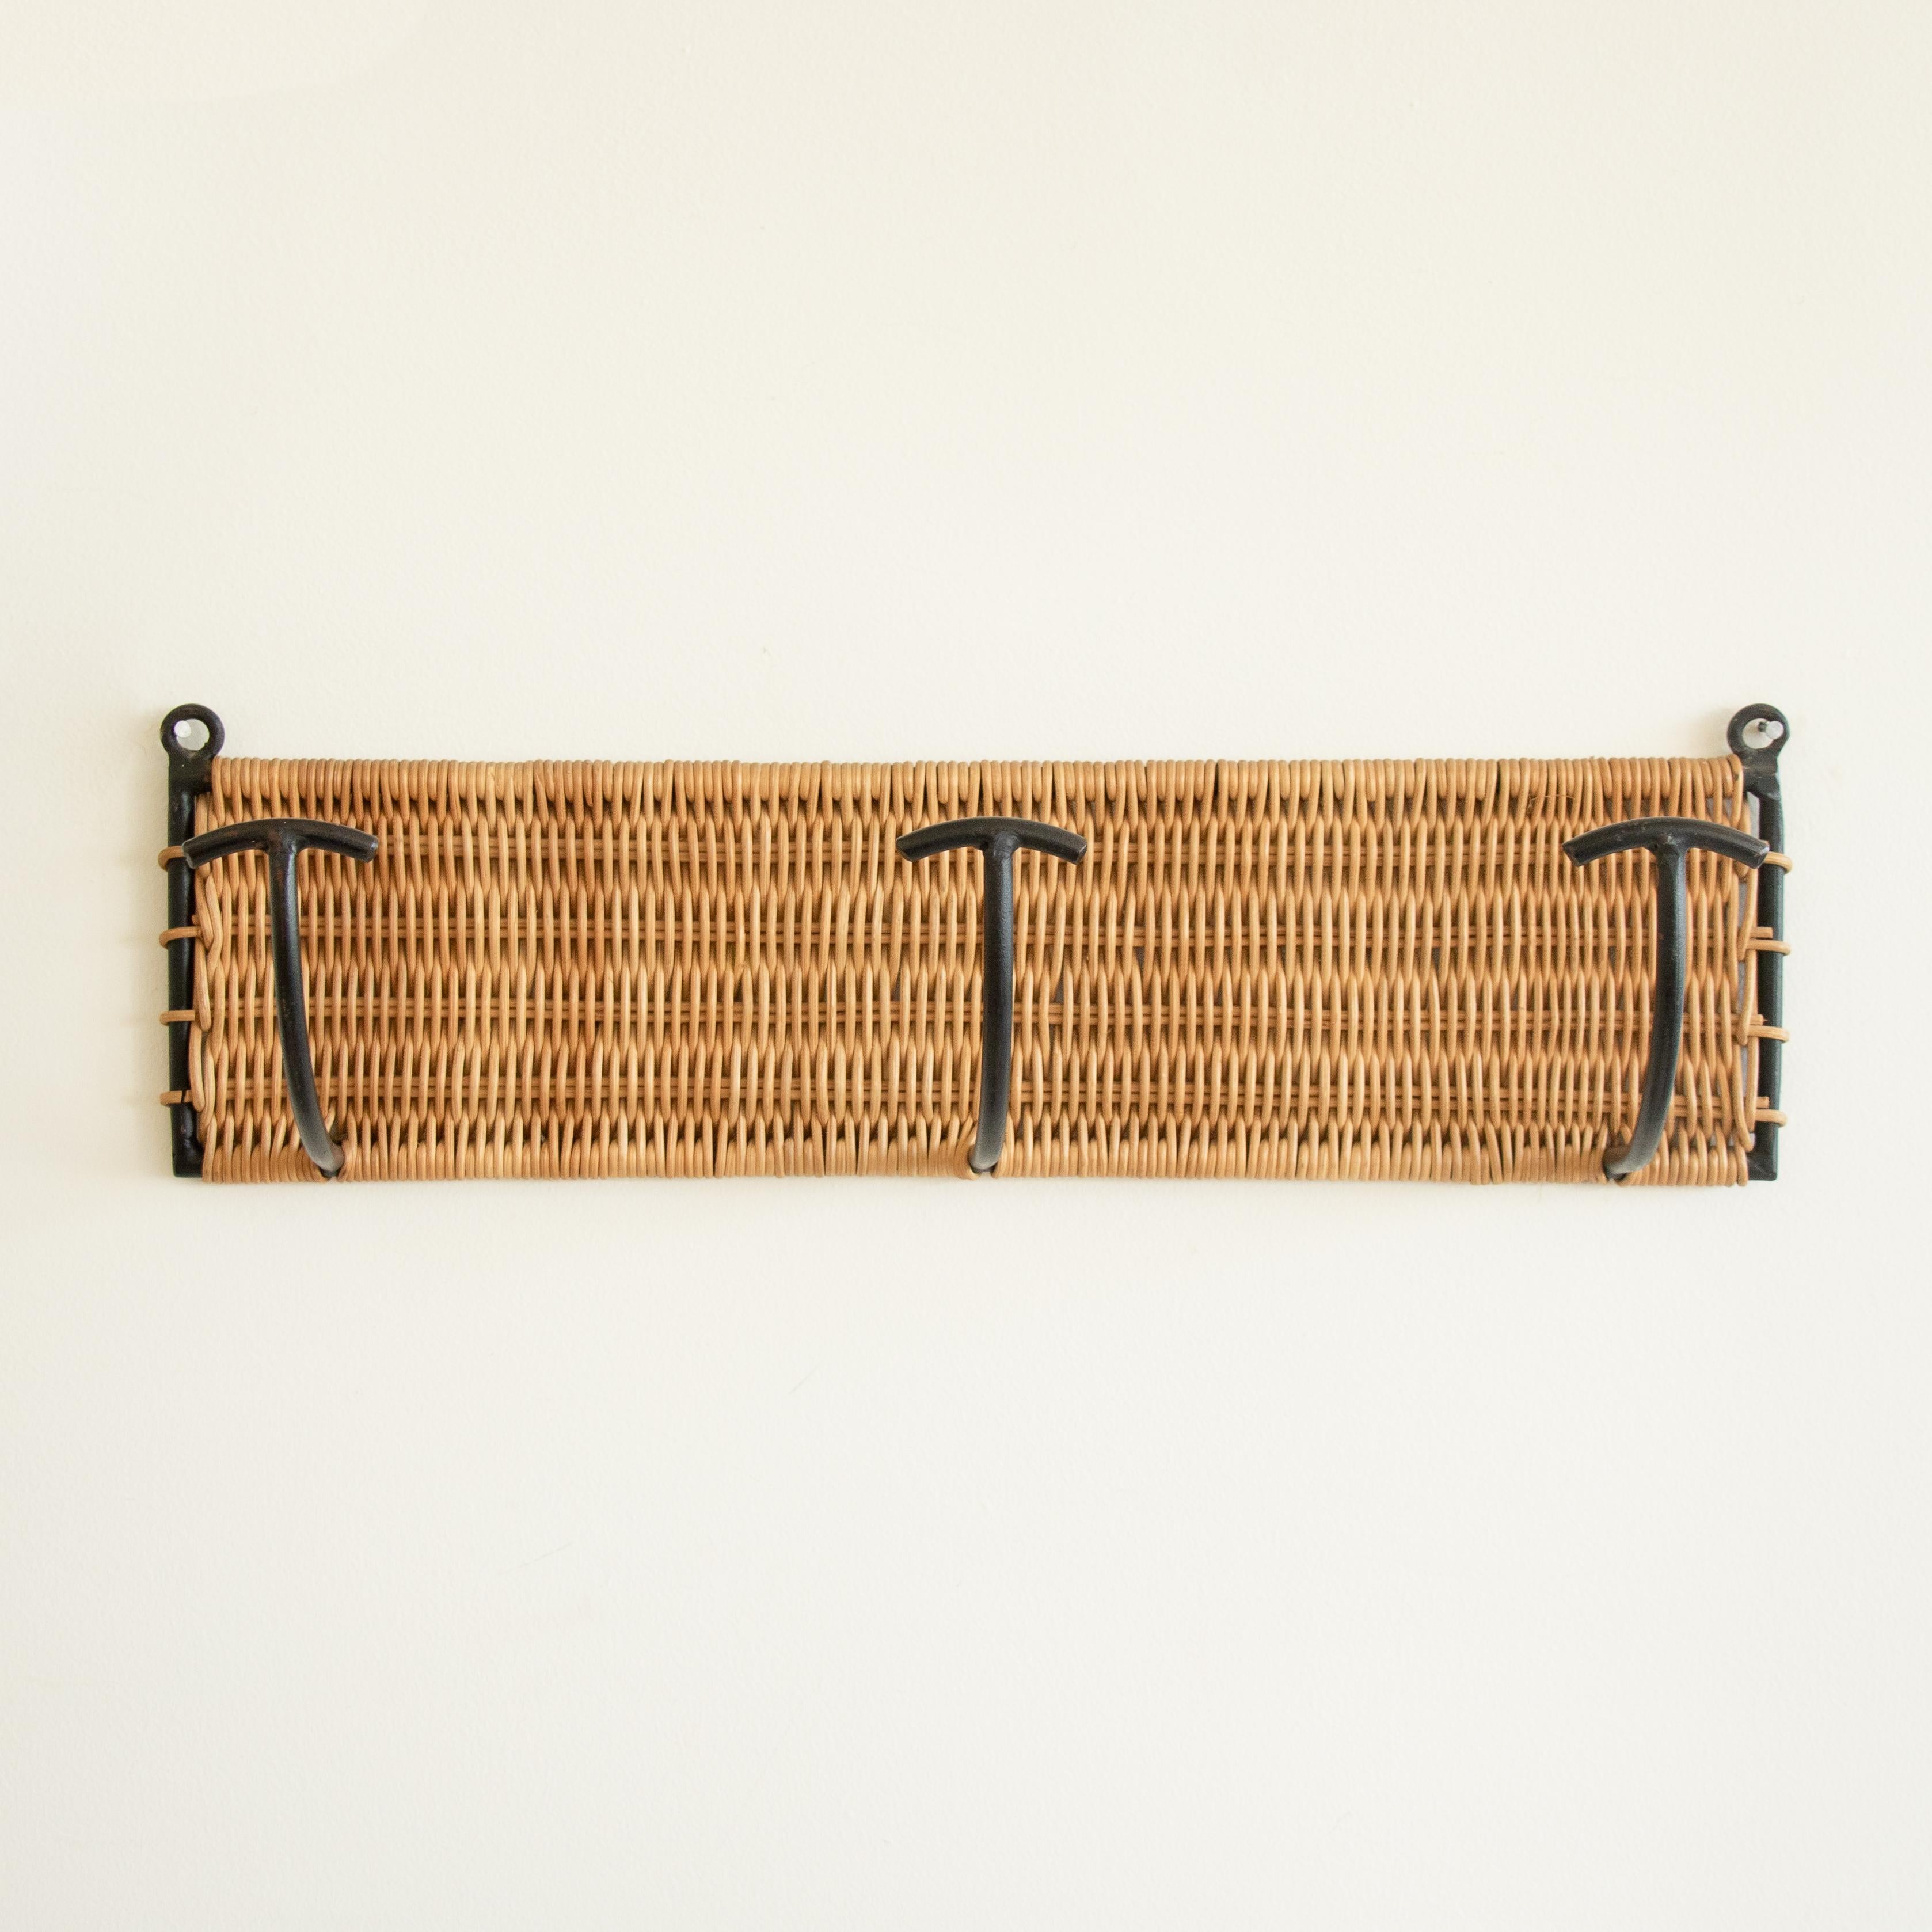 Vintage woven wicker wall rack with 3 iron hooks to hang coats or hats. Black painted iron and wicker is all original. Beautiful and functional piece from France, 1950s. Three available, sold individually. 